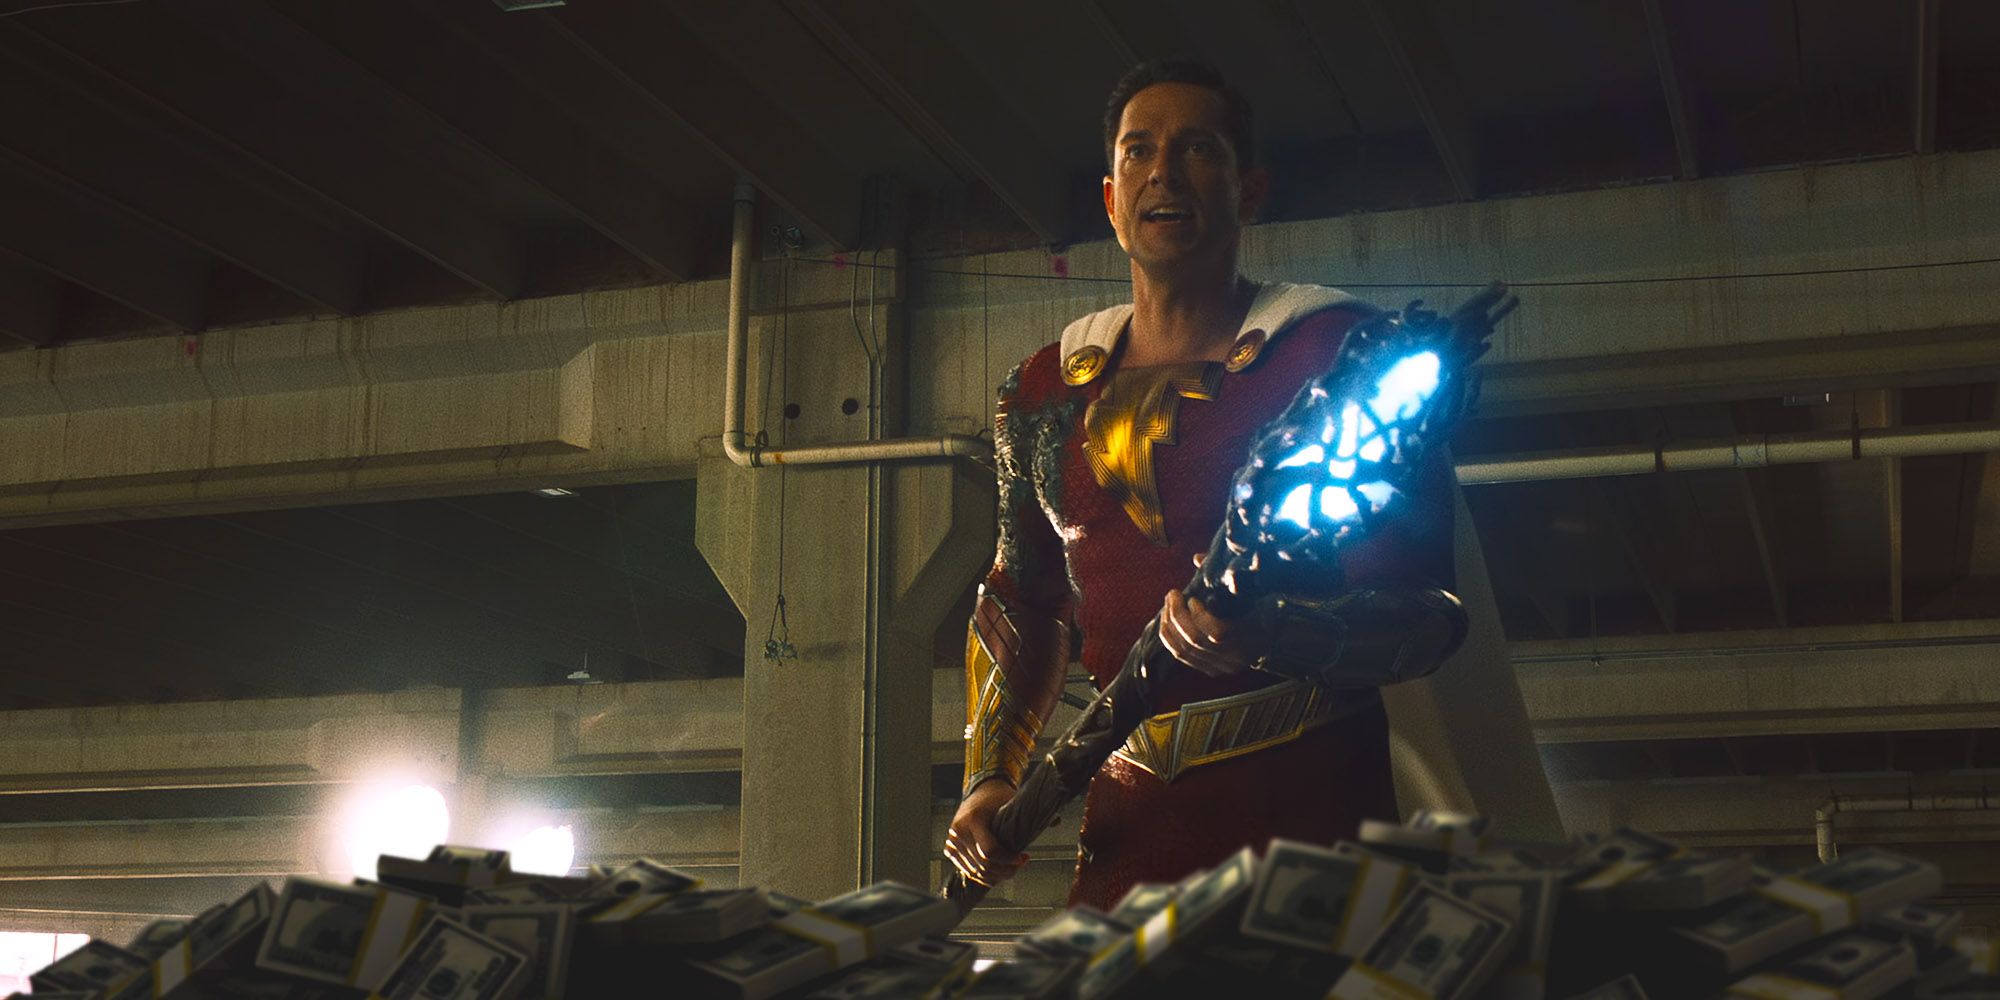 How much will 'Shazam! Fury of the Gods' make at the box office? - AS USA